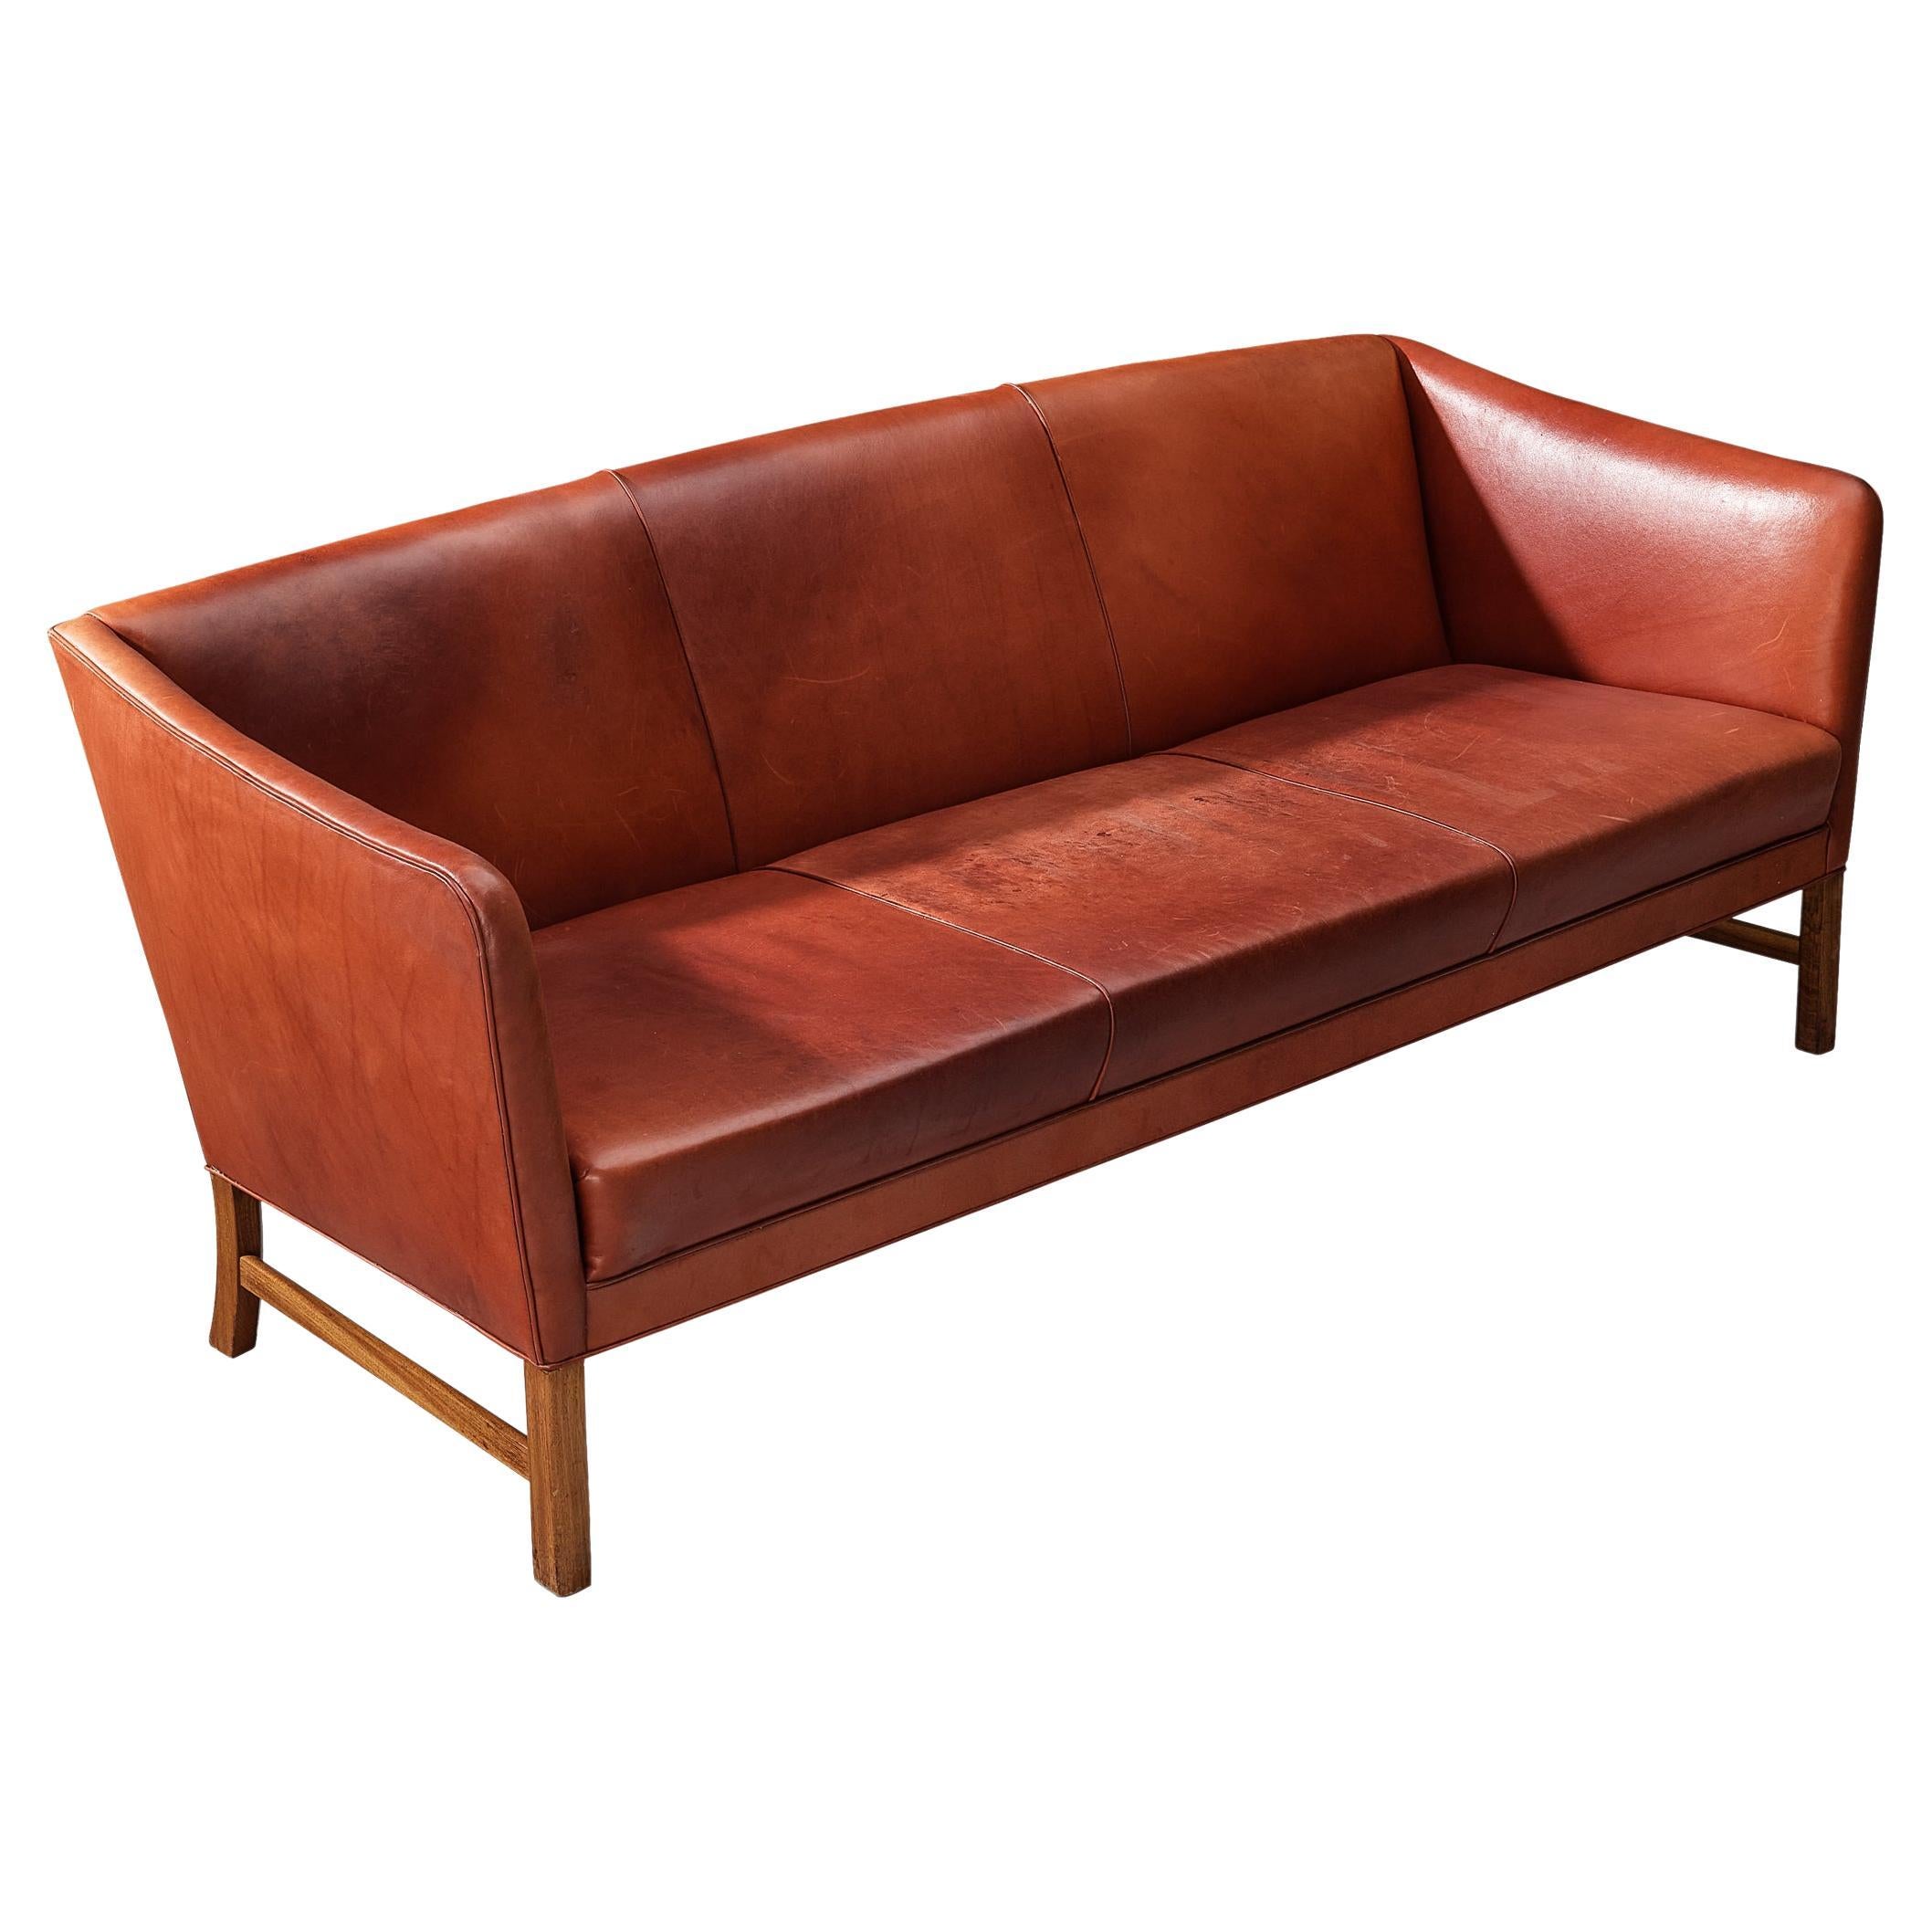 Ole Wanscher for A.J. Iverseren Sofa in Red Leather and Teak